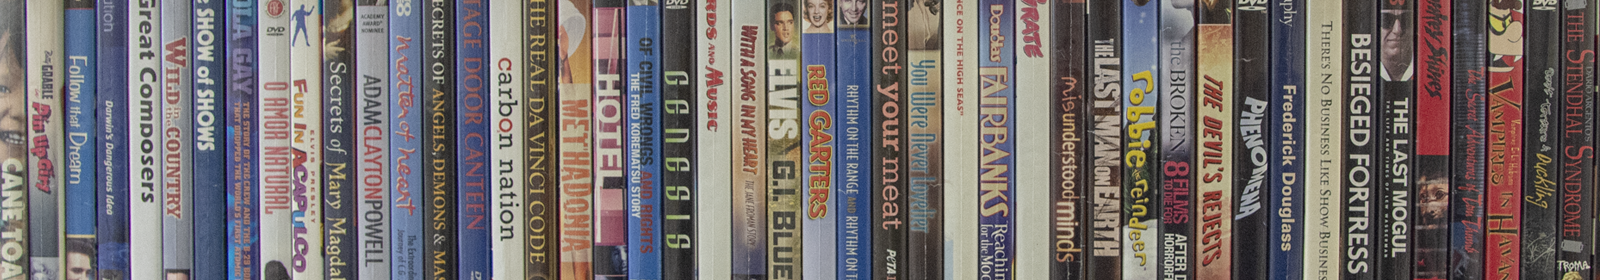 A row of various pop culture DVDs